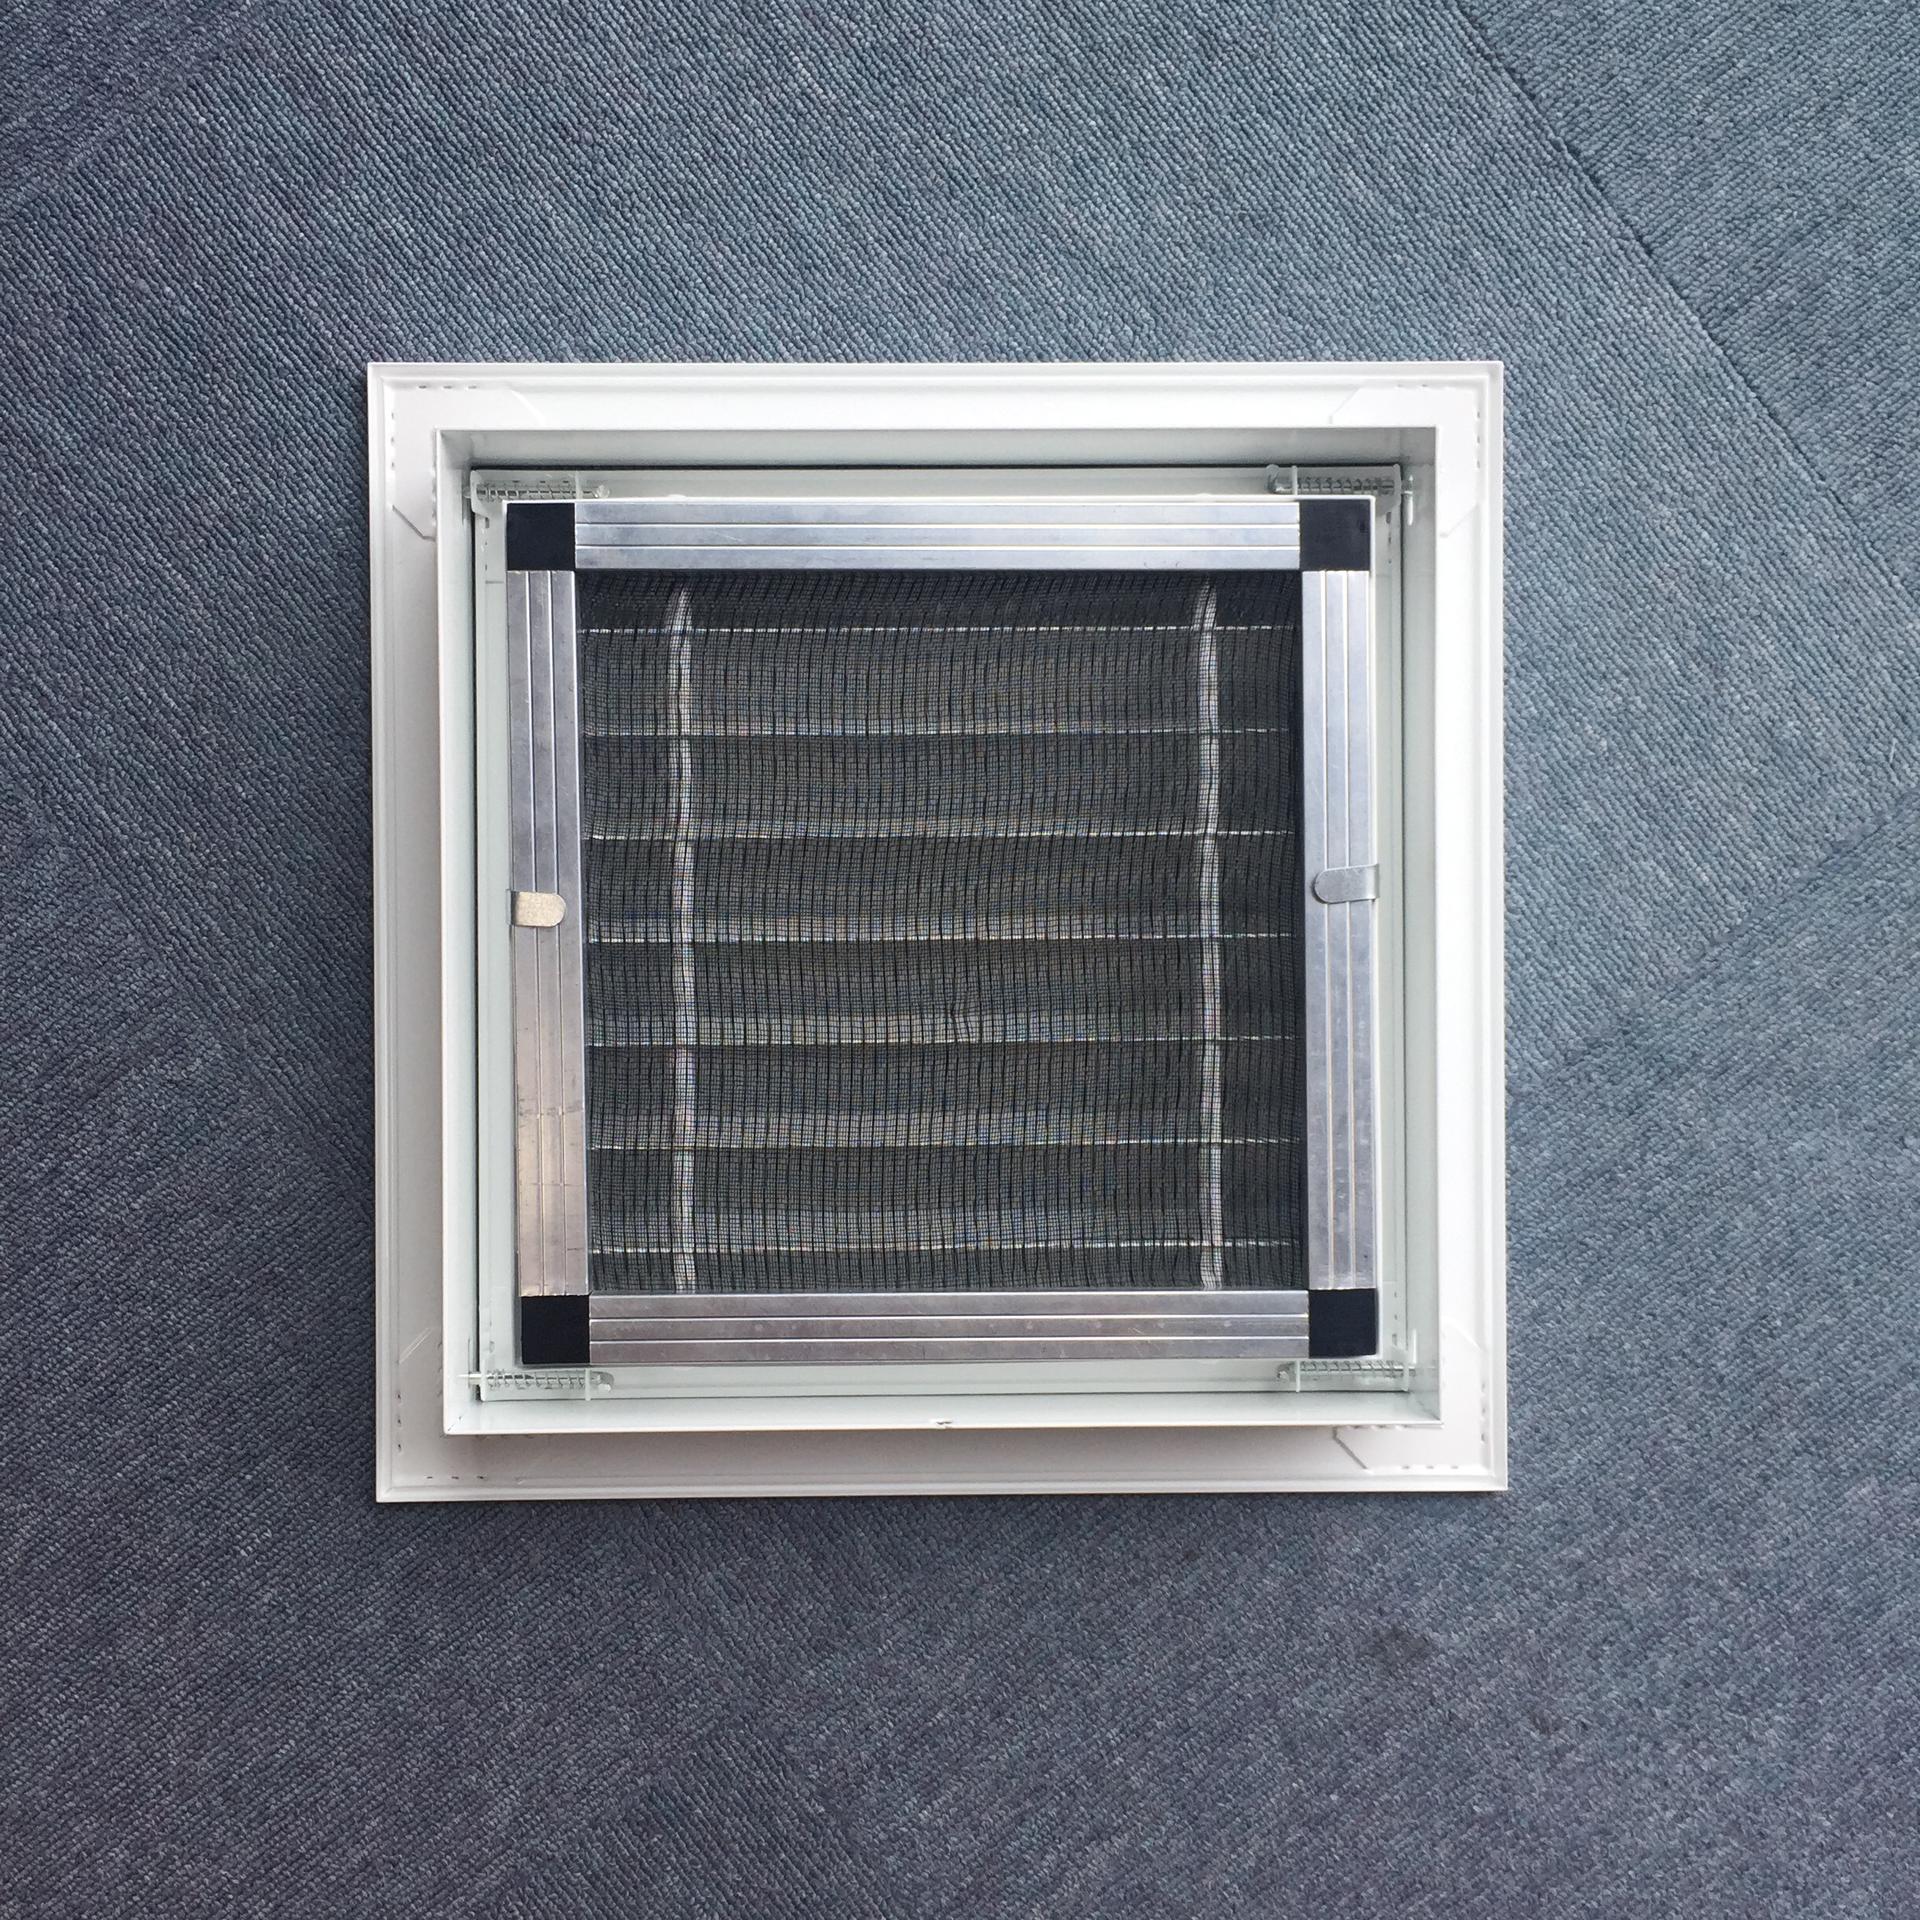 HVAC System Removable Core Air Vent Hinged Filter Air Grille